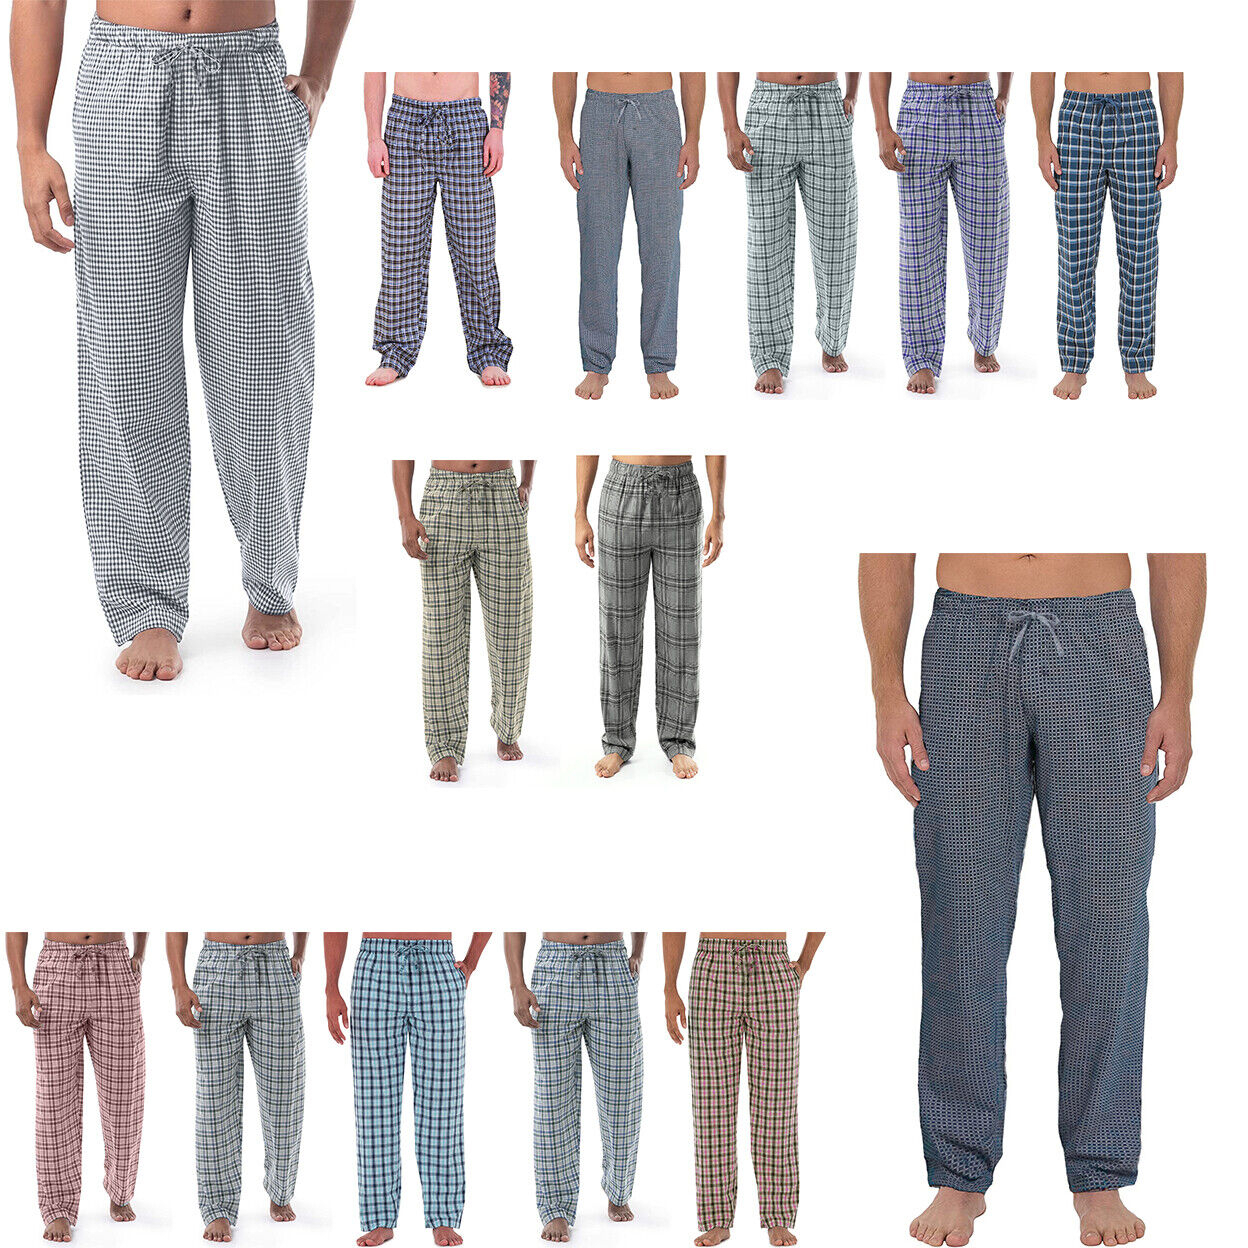 Multi-Pack: Men's Ultra-Soft Solid & Plaid Cotton Jersey Knit Comfy Sleep Lounge Pajama Pants - 1-pack Plaid, X-large